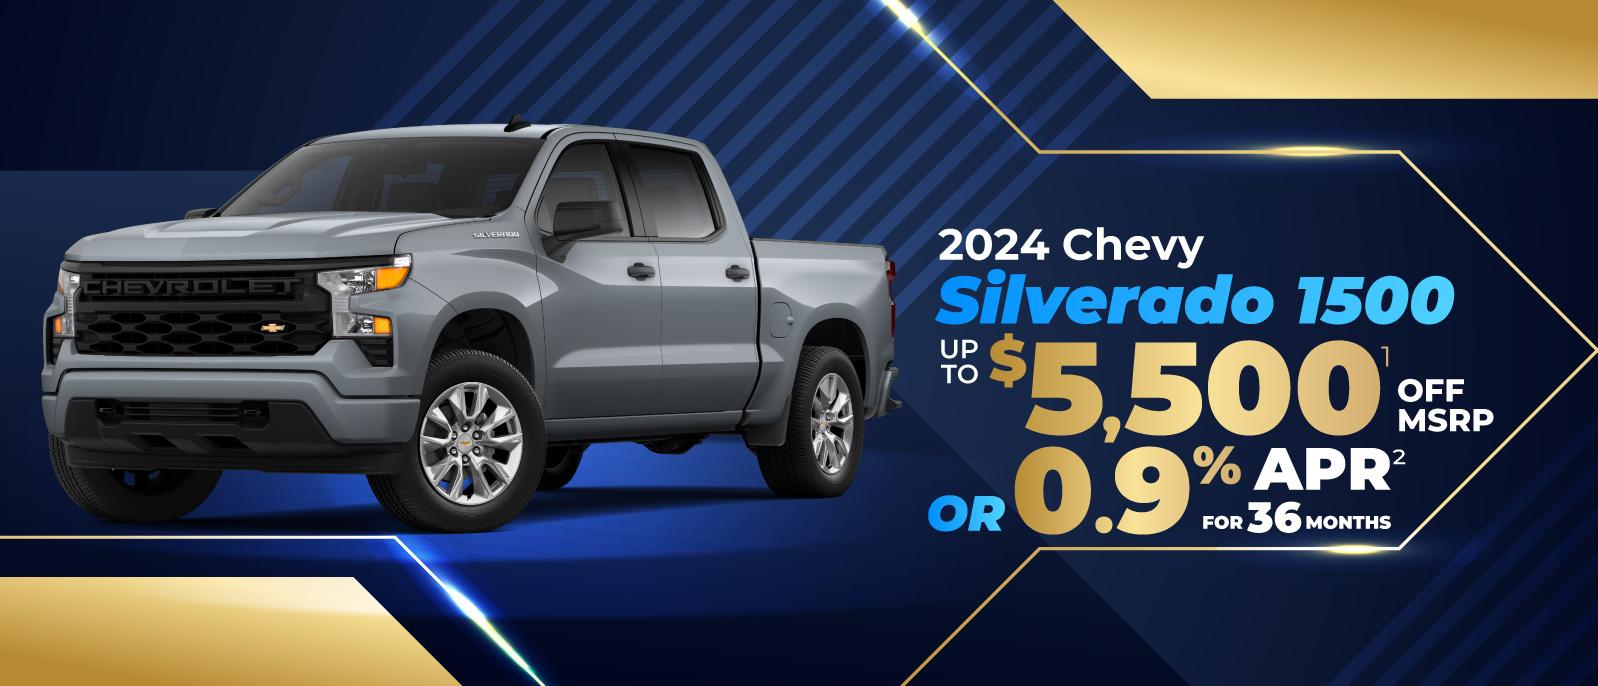 NEW Chevy Silverado 1500 - save up to $5500 or 0.9% APR for 36 months